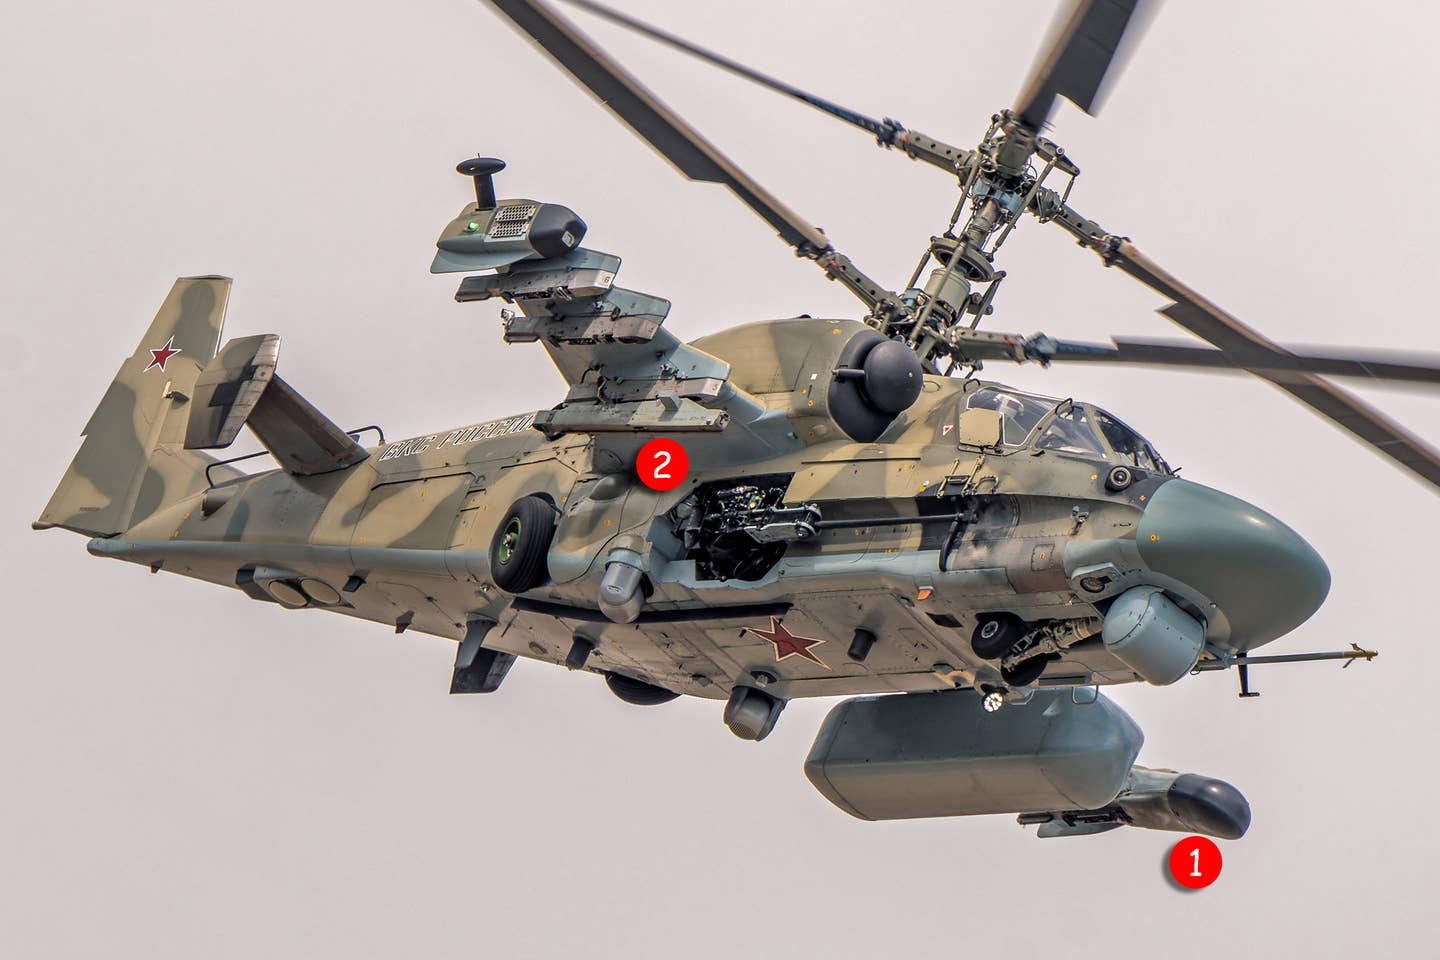 The first modernized Ka-52M helicopter fitted with the AS-BPLA datalink pod (1) and APU-305 rail (2) for the LMUR missile. <em>Piotr Butowski</em>